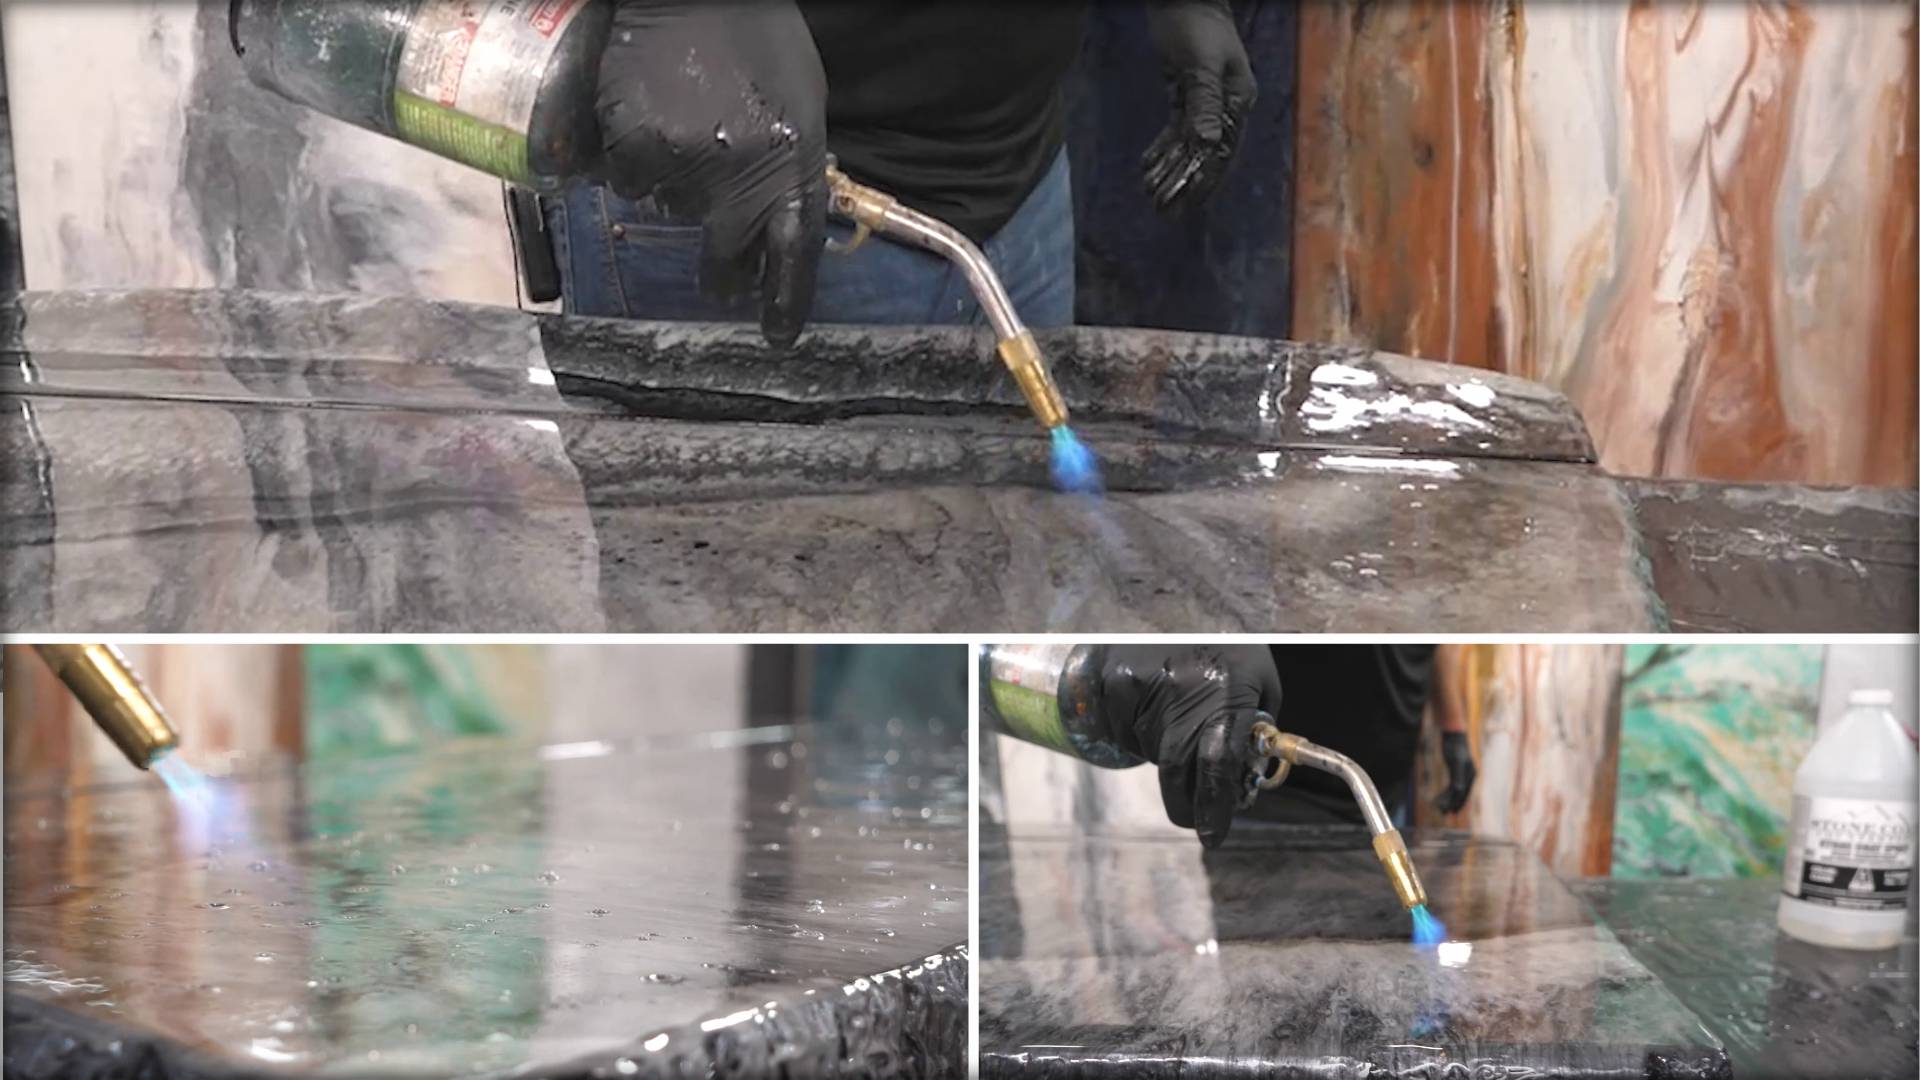 Step 4 of a DIY project: Using a propane torch to remove air bubbles from epoxy